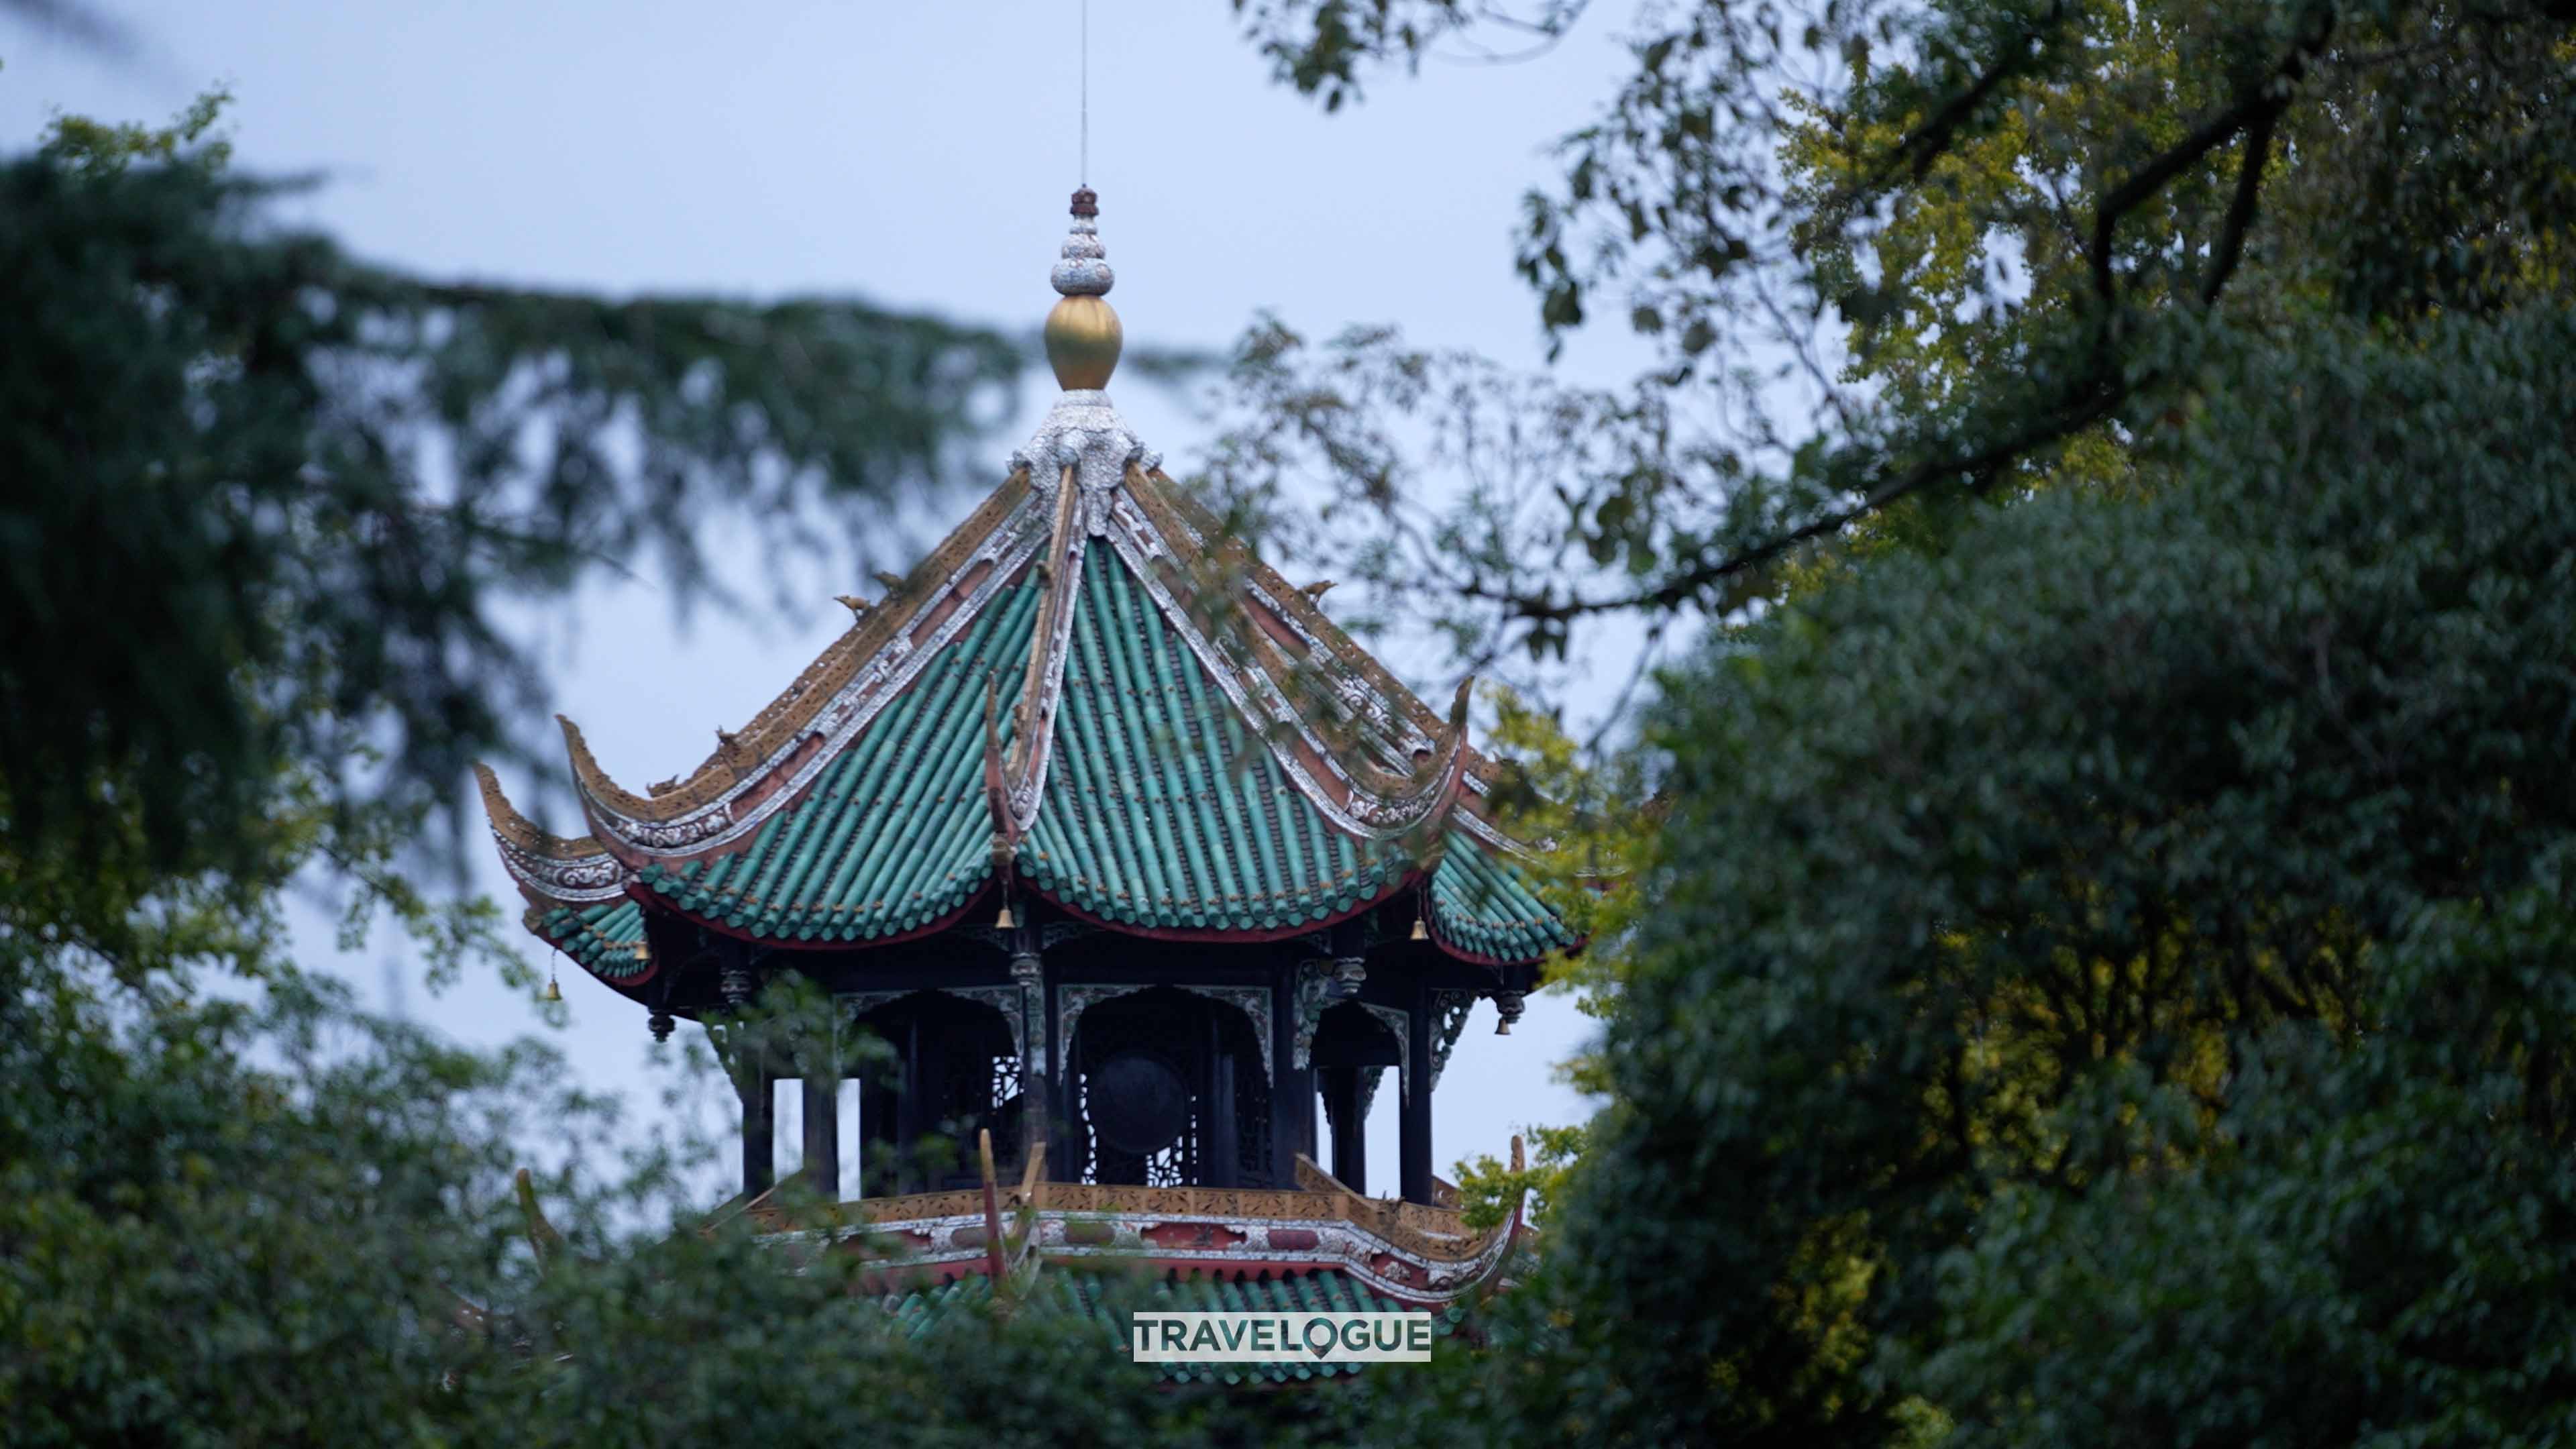 The tallest pavilion at Wangjianglou Park was once the highest point in Chengdu, Sichuan Province. /CGTN